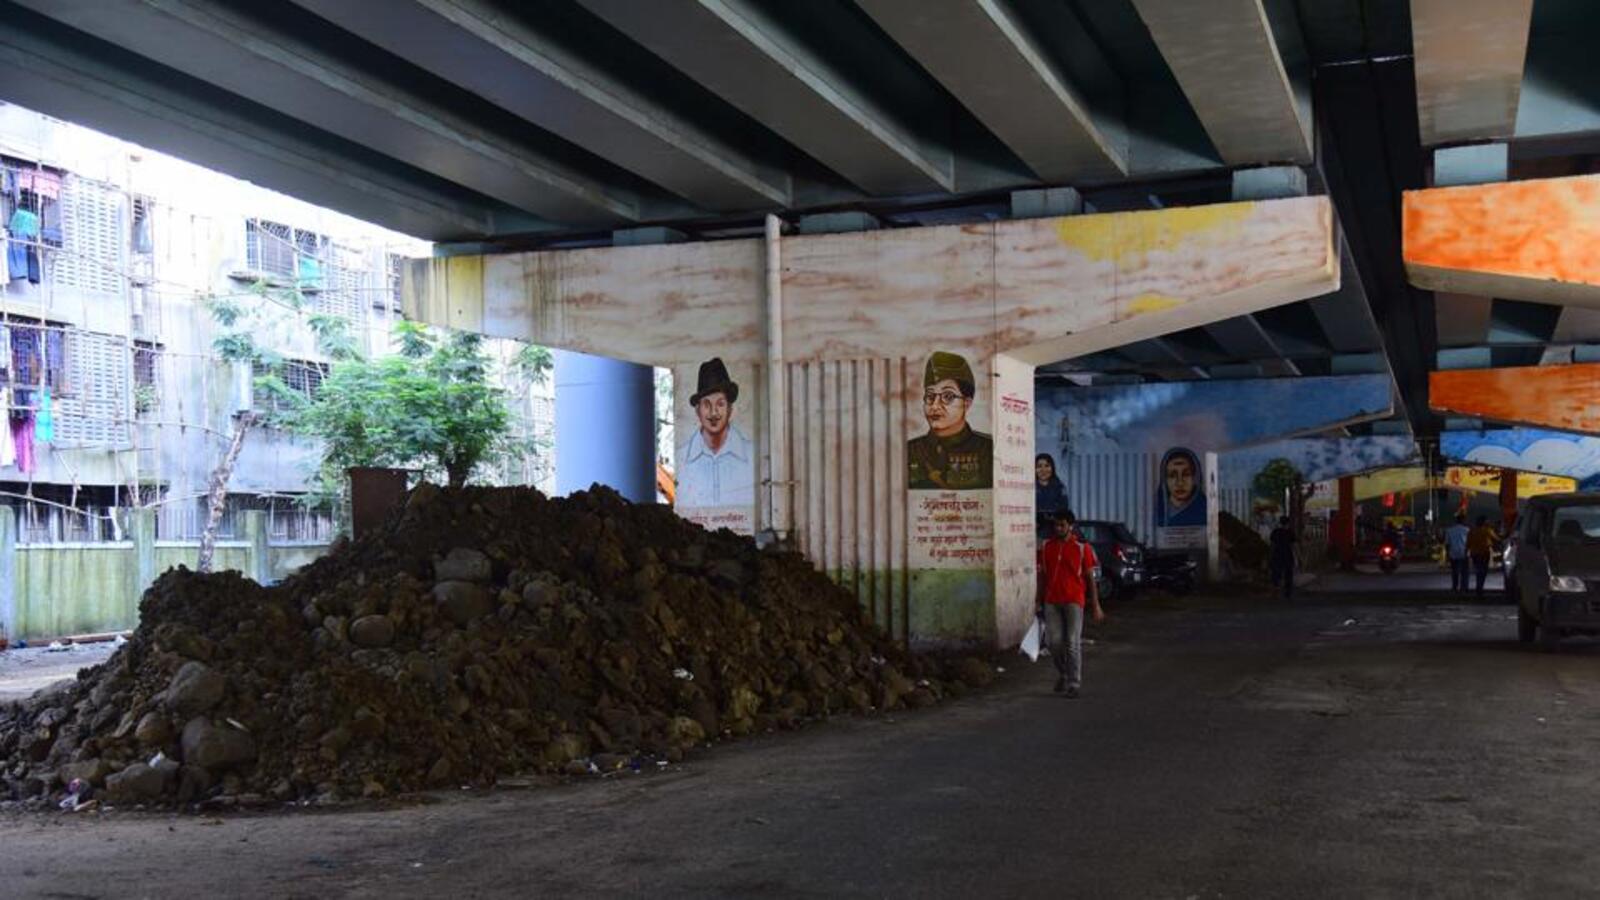 Rights commission raps MMRDA chief over besmeared portraits under Dahisar flyover